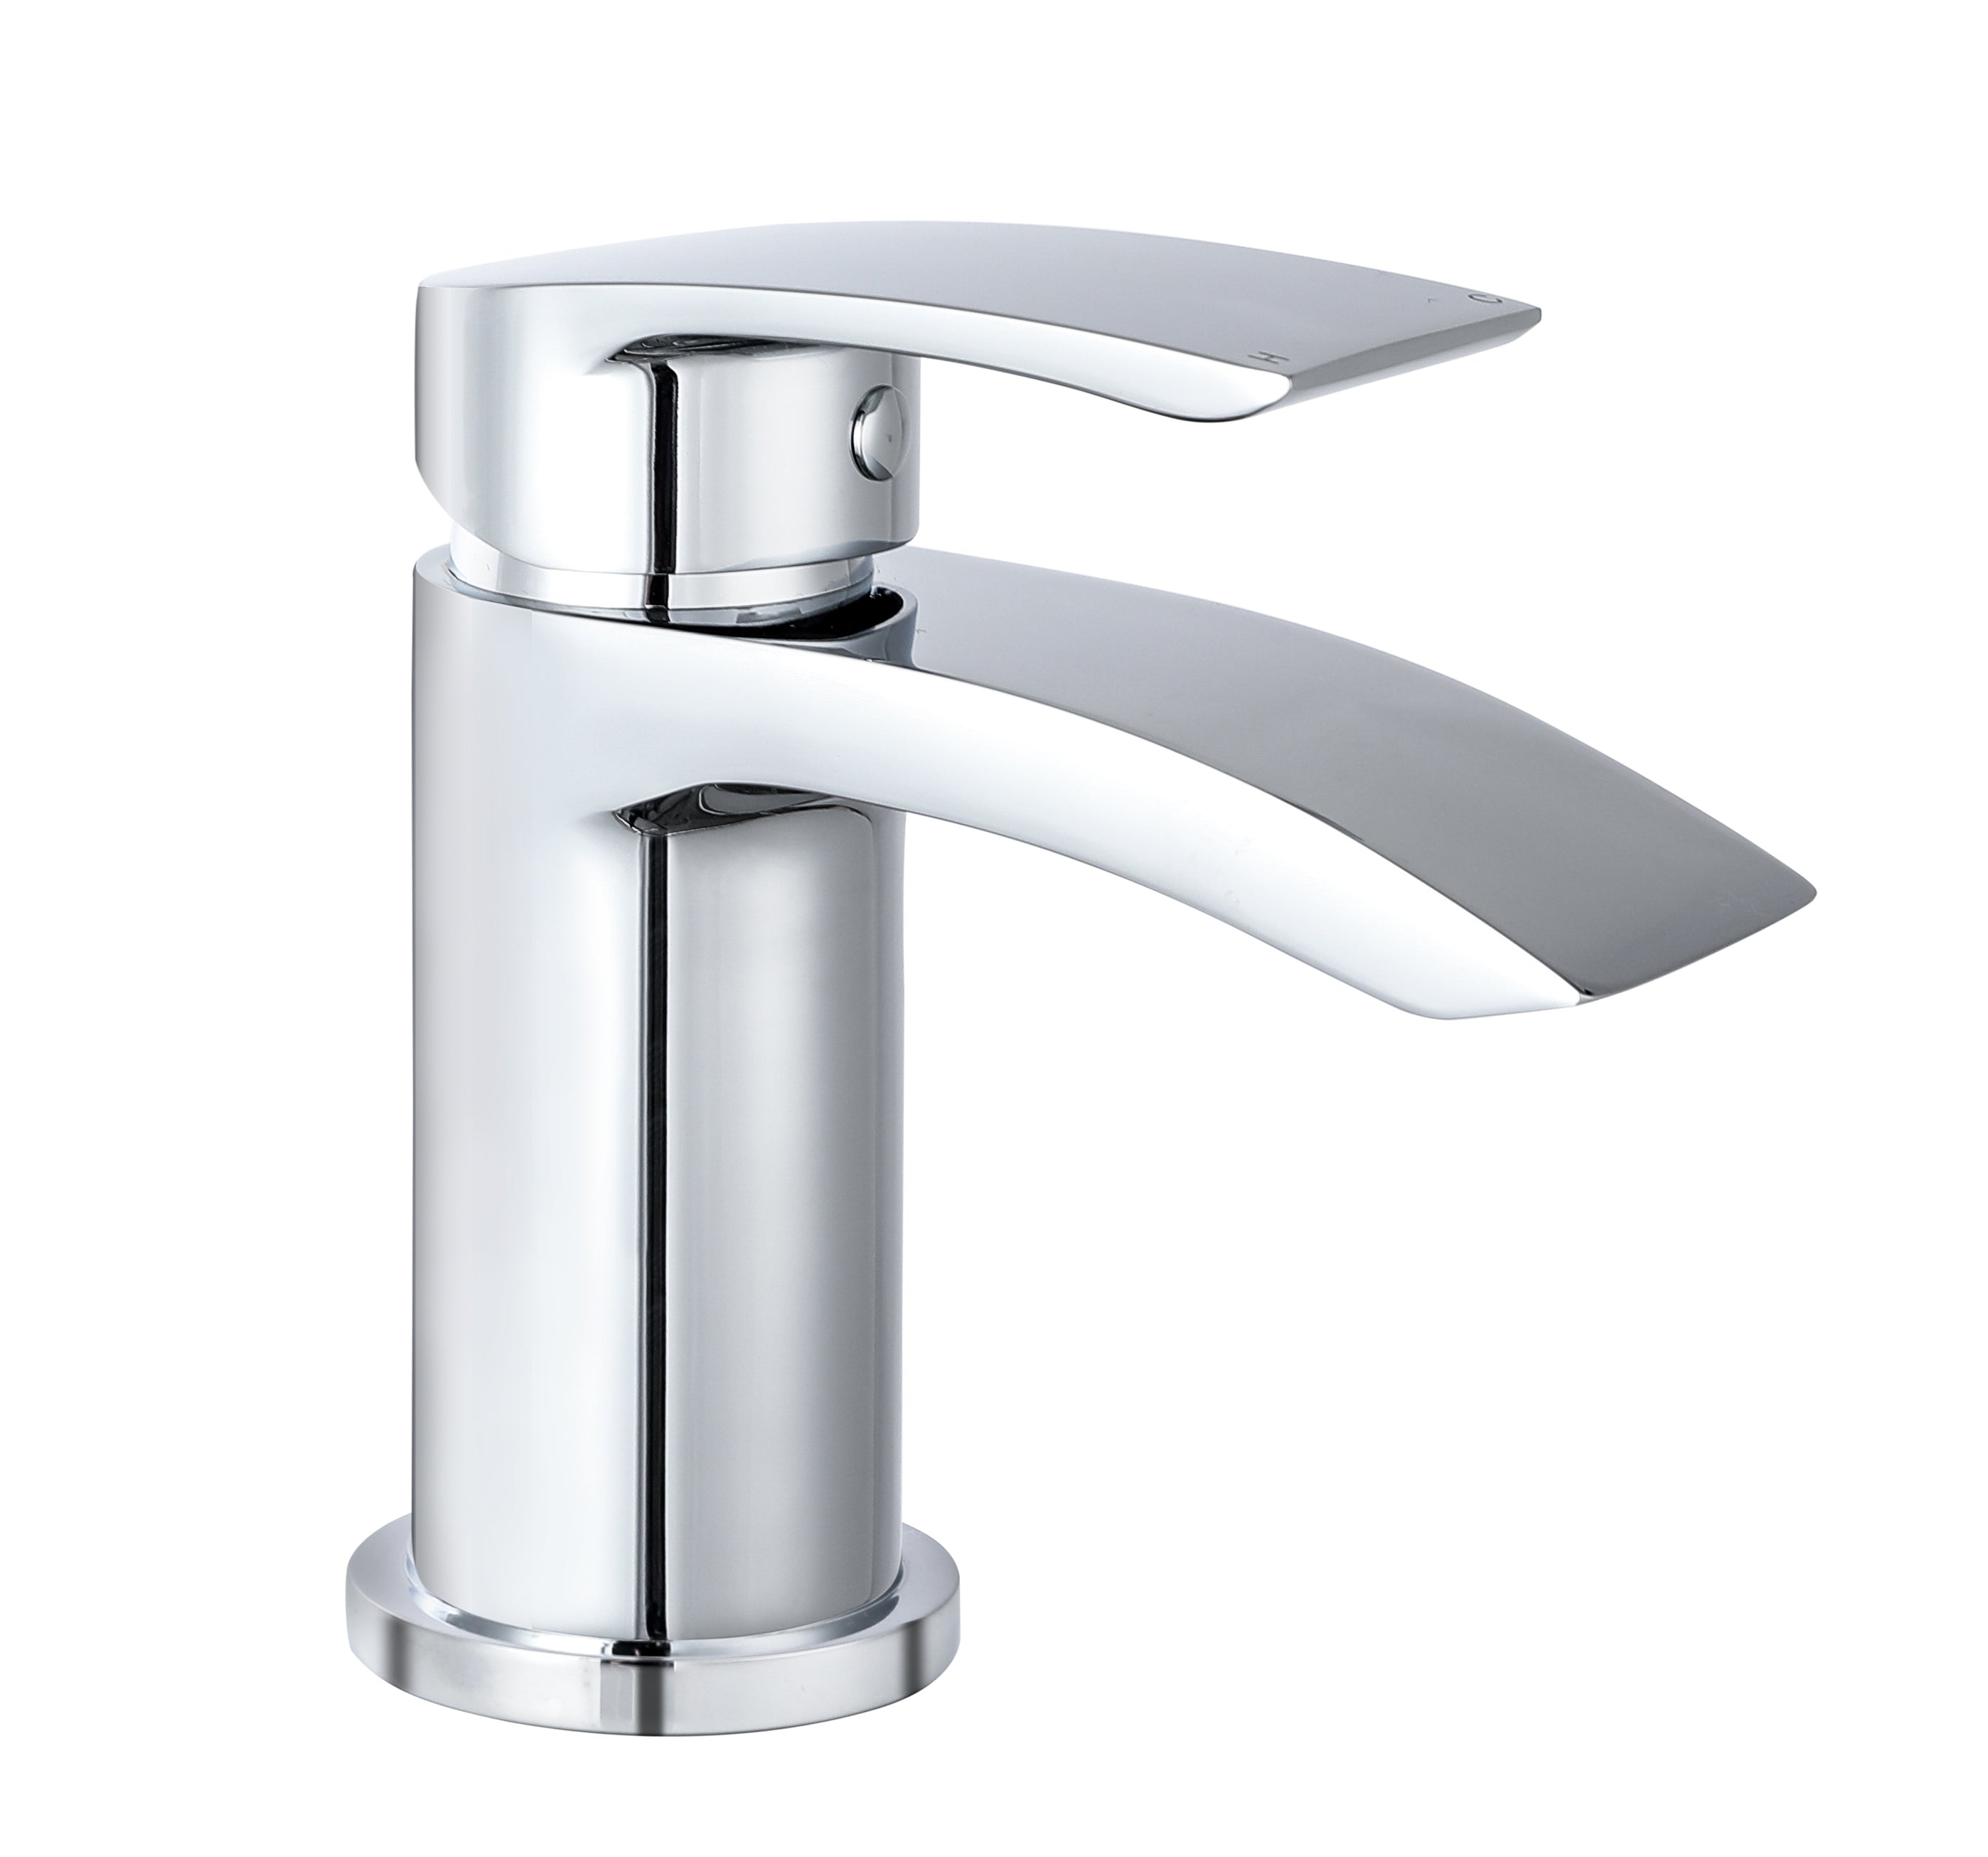 Chrome Carter Mono Basin Mixer Tap with Waste, ideal for modern bathrooms. Buy now for stylish water control.